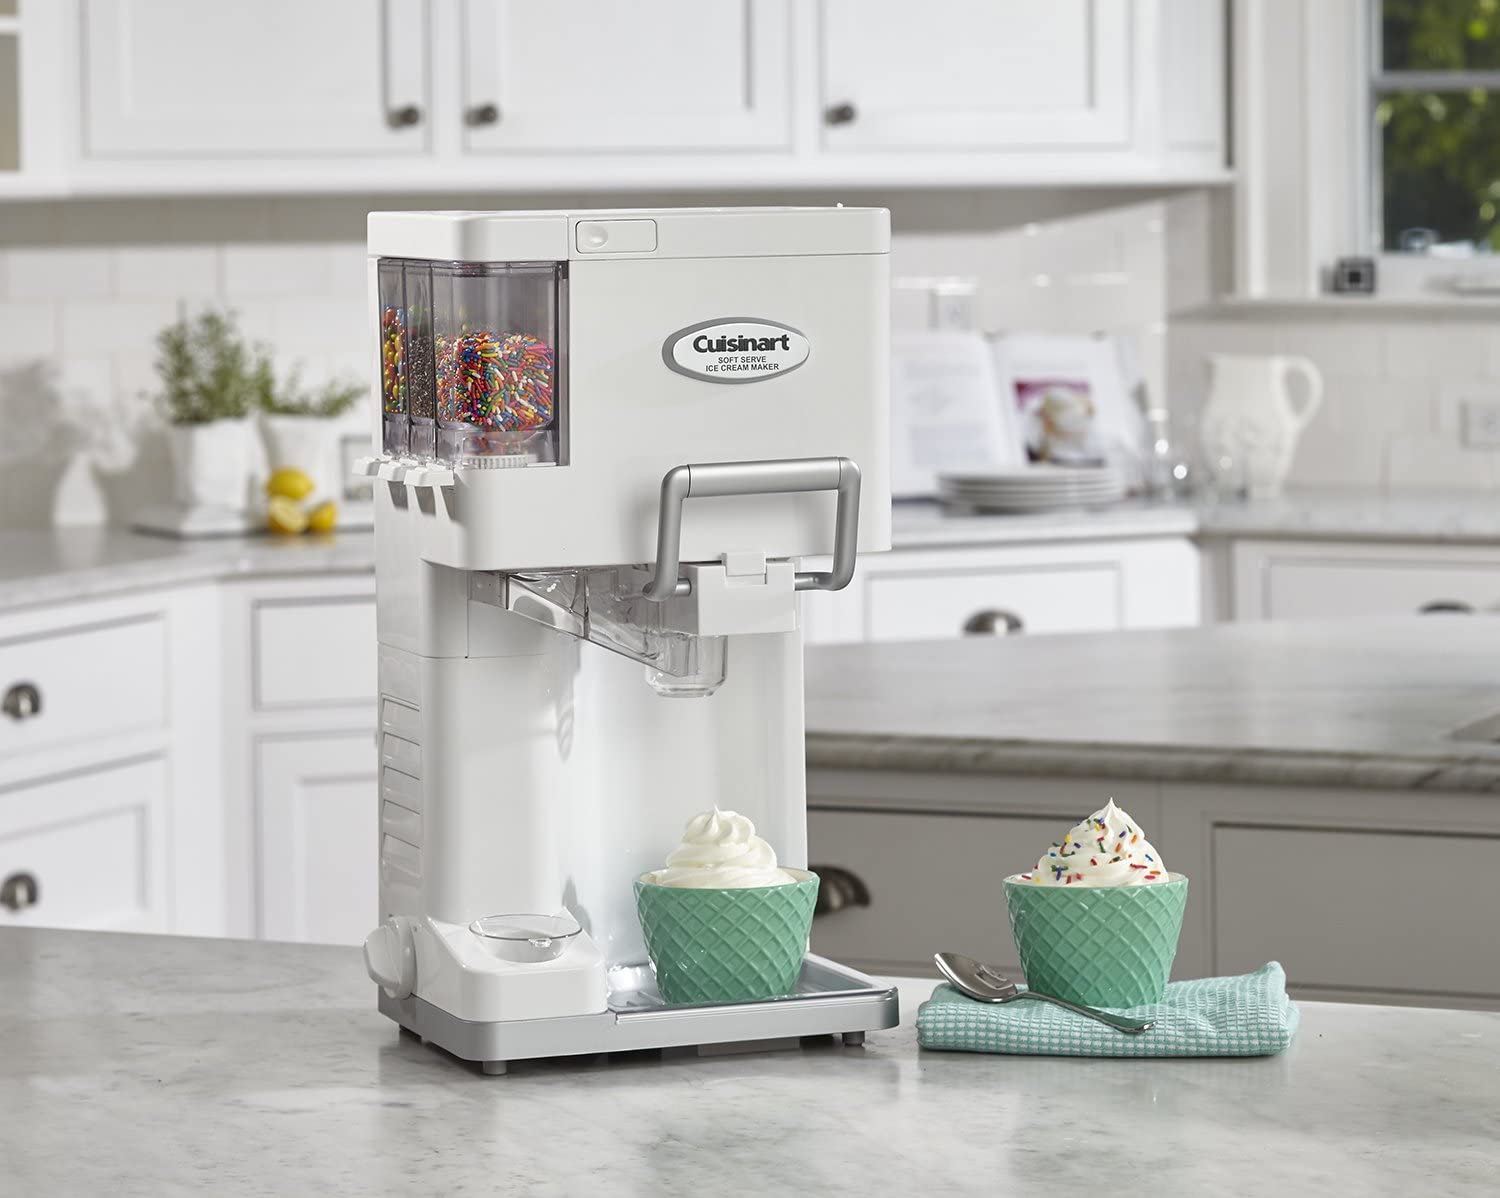 Make Tasty Ice Creams with These Home Ice Cream Maker Machines